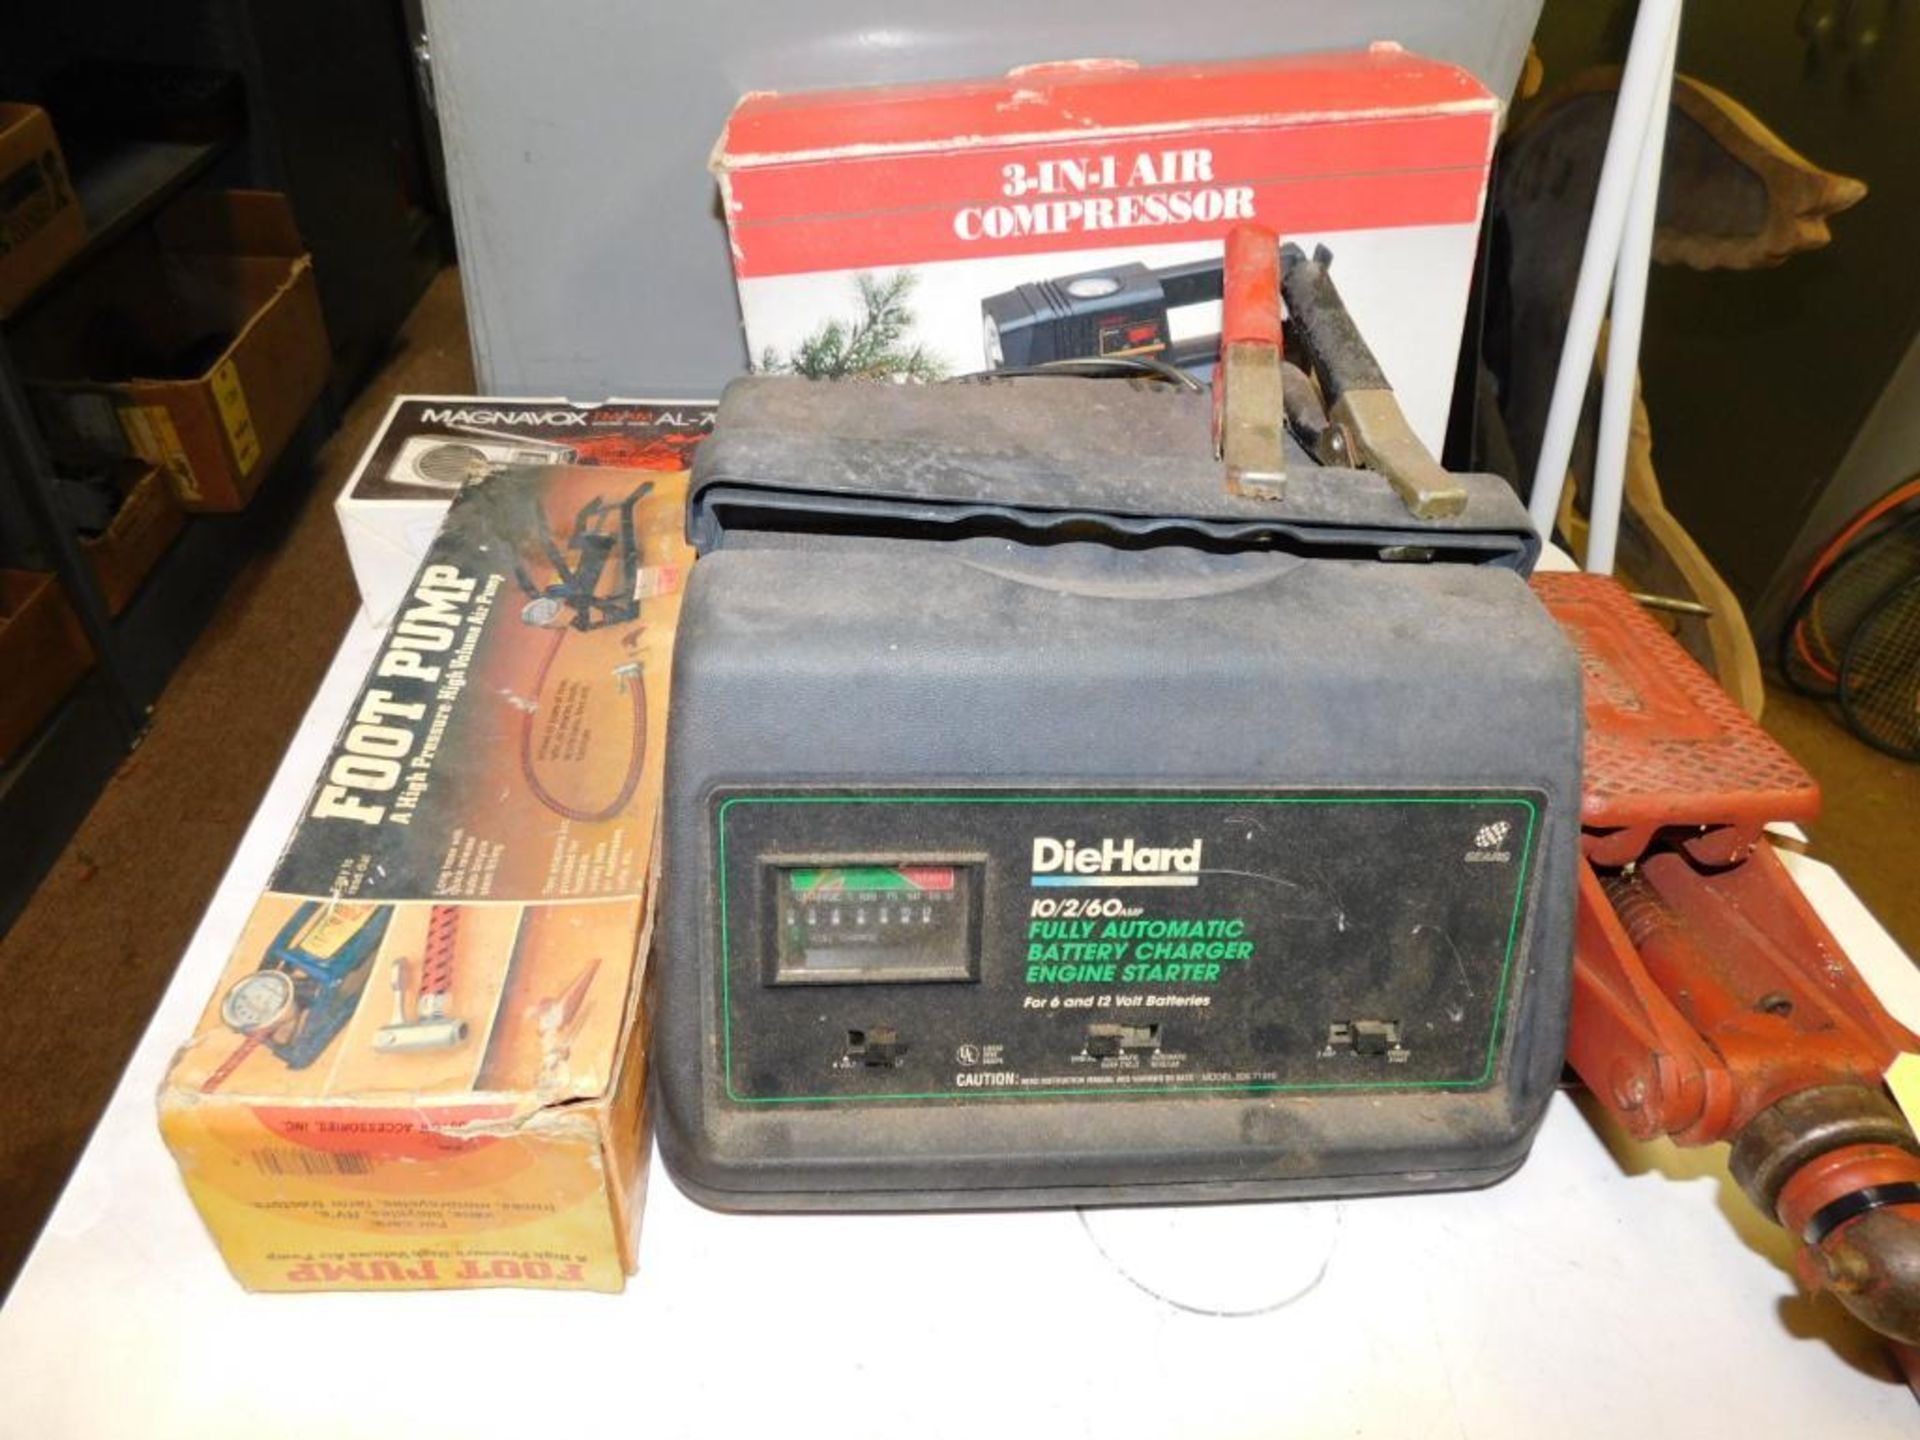 LOT: Cross Country Jack, Die Hard Battery Charger, 3 - in - 1 Air Compressor, Foot Pump, Pocket Radi - Image 3 of 4